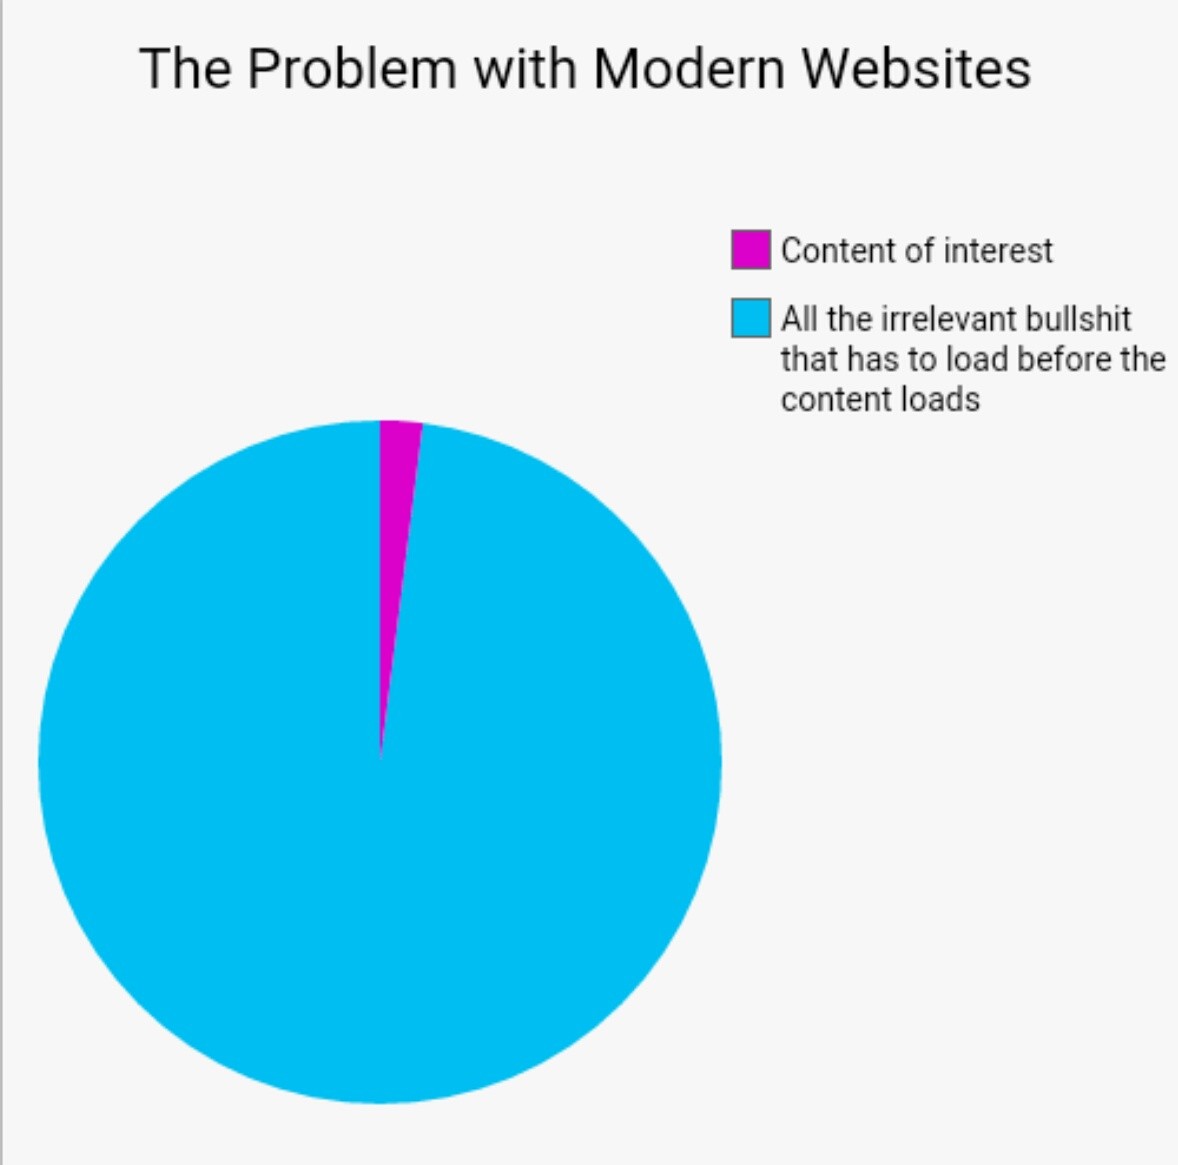 The problem with modern websites